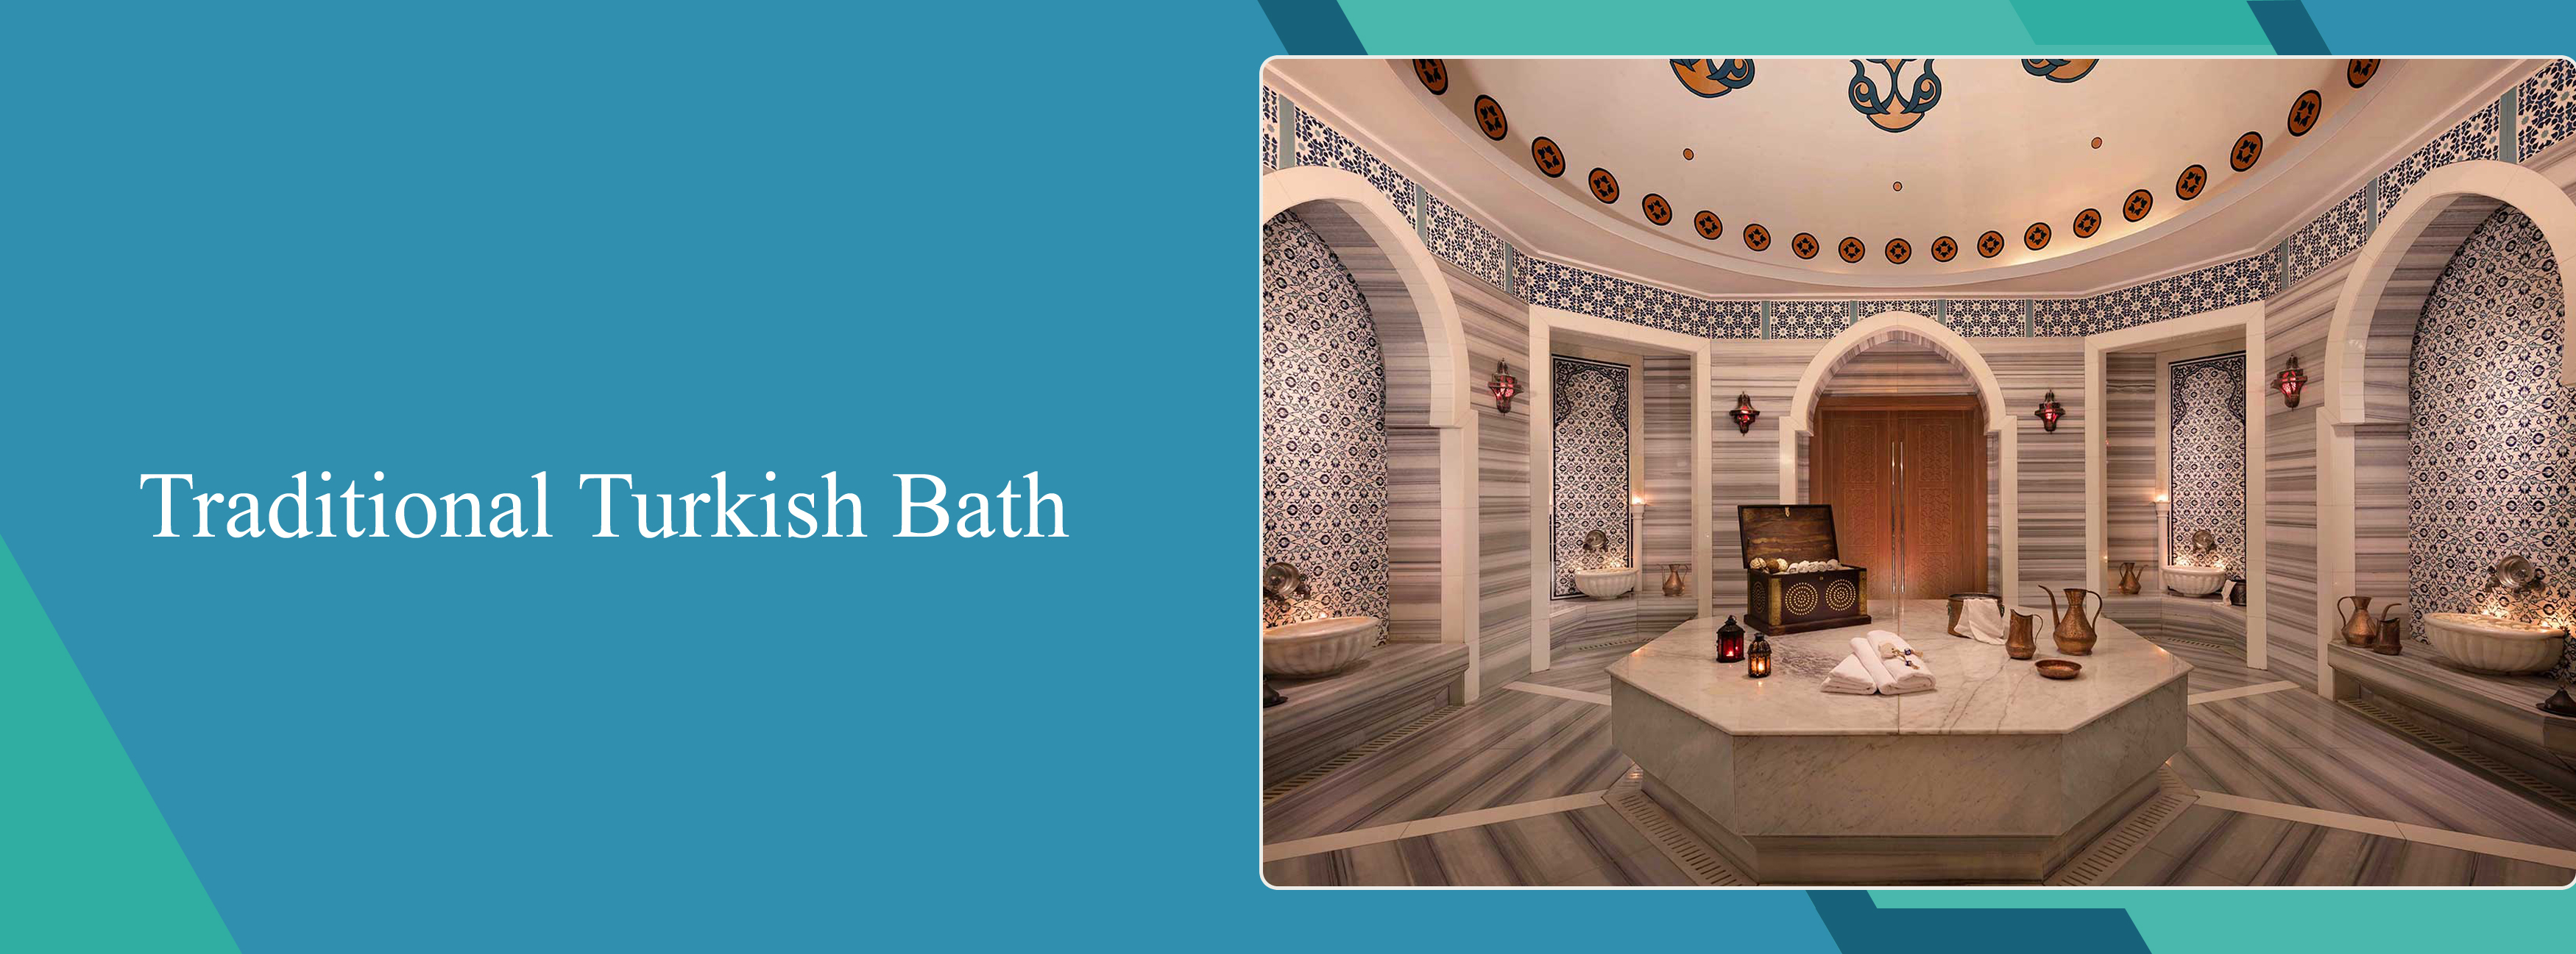 Traditional Turkish Bath with Massages